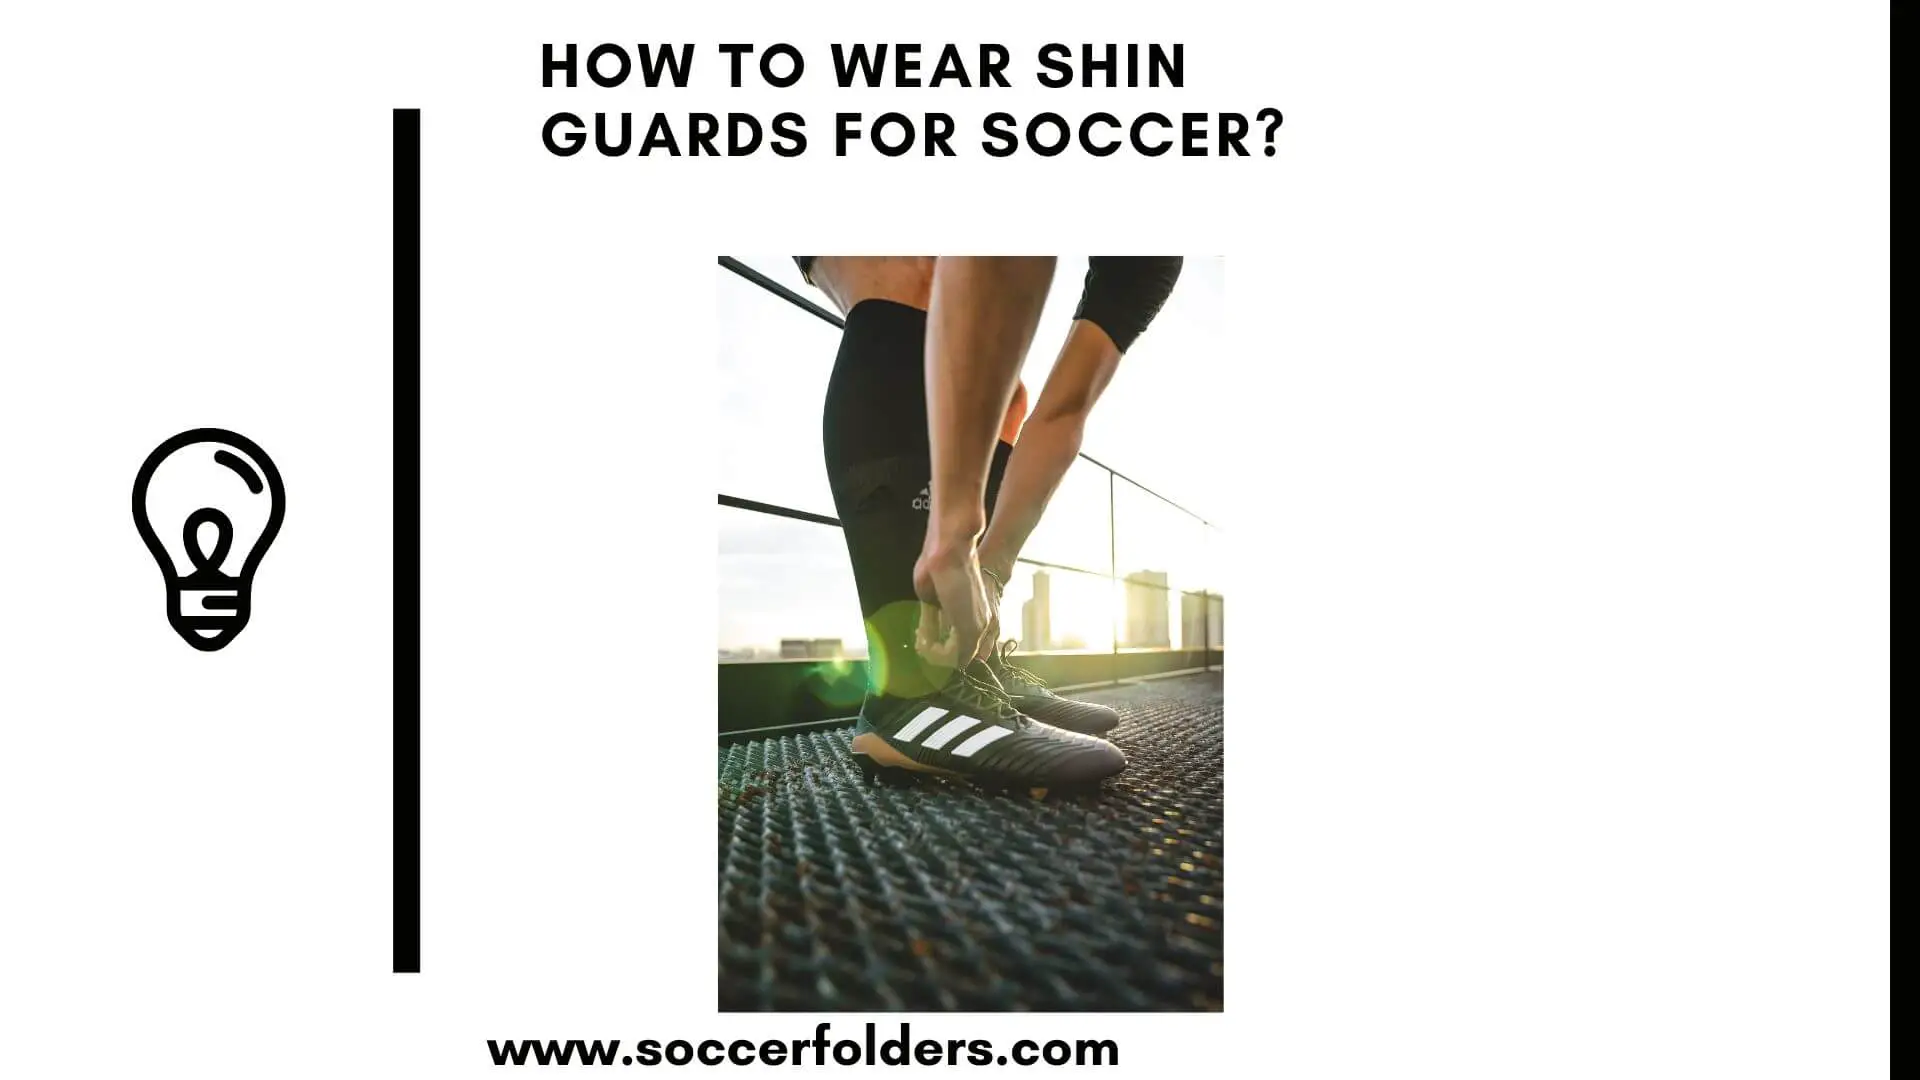 How to wear shin guards for soccer - Featured image